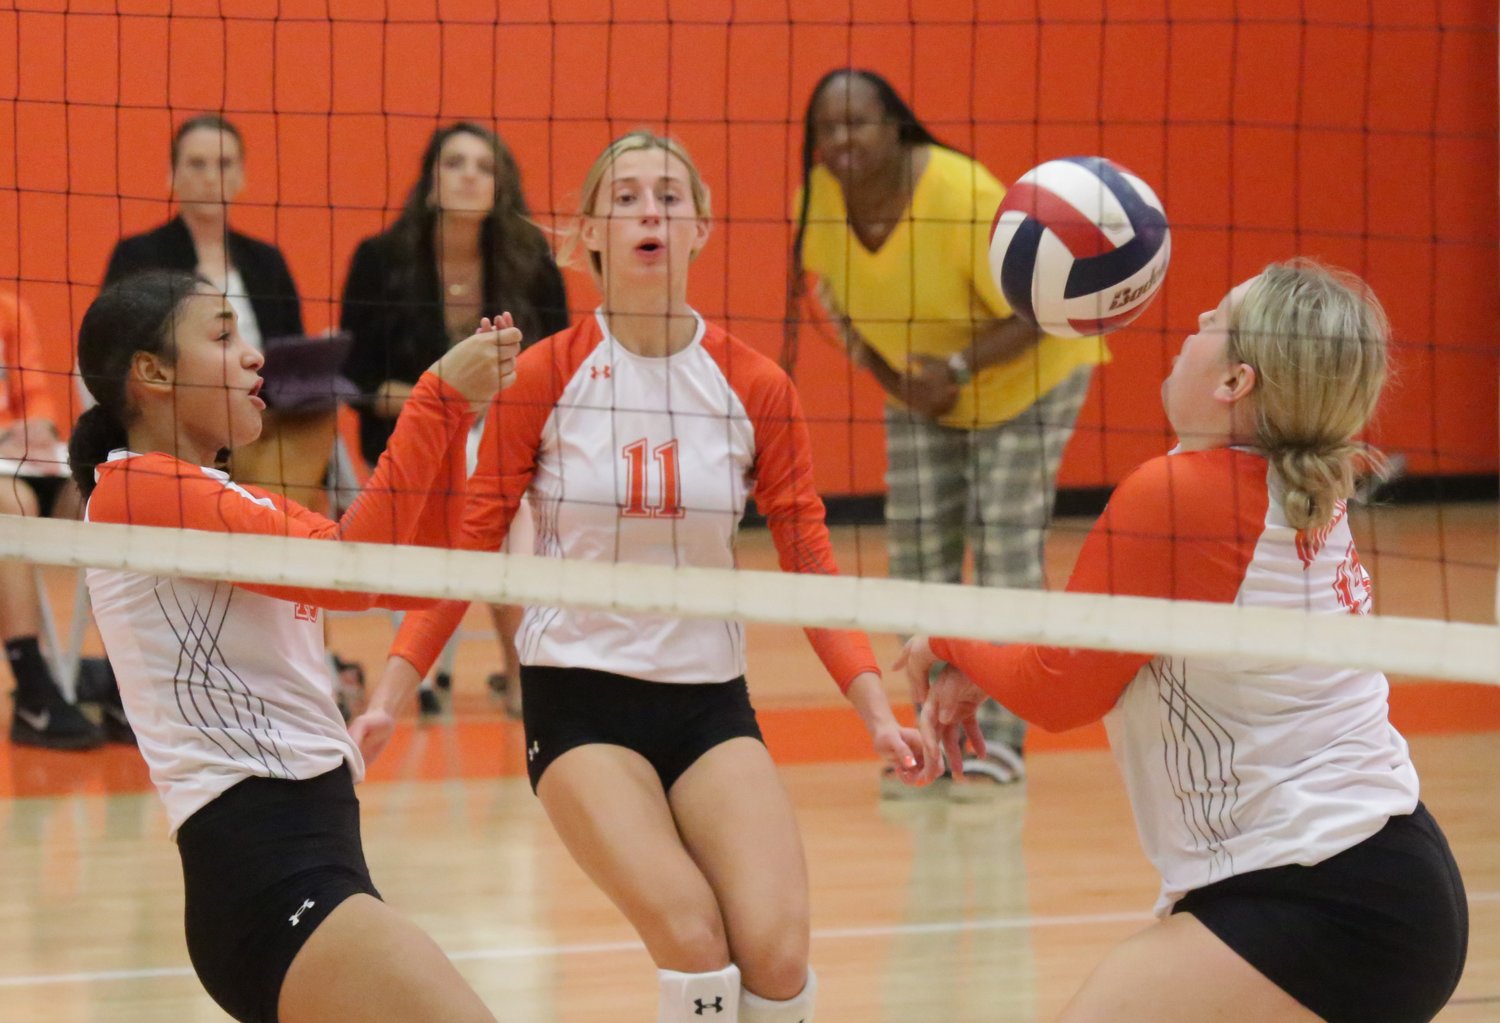 Every single point was crucial in Mineola’s four-set win over Mt. Vernon last Friday. Here Kyra Jackson, Olivia Hughes, and Jocelyn Whitehead (l-r) react to the action.